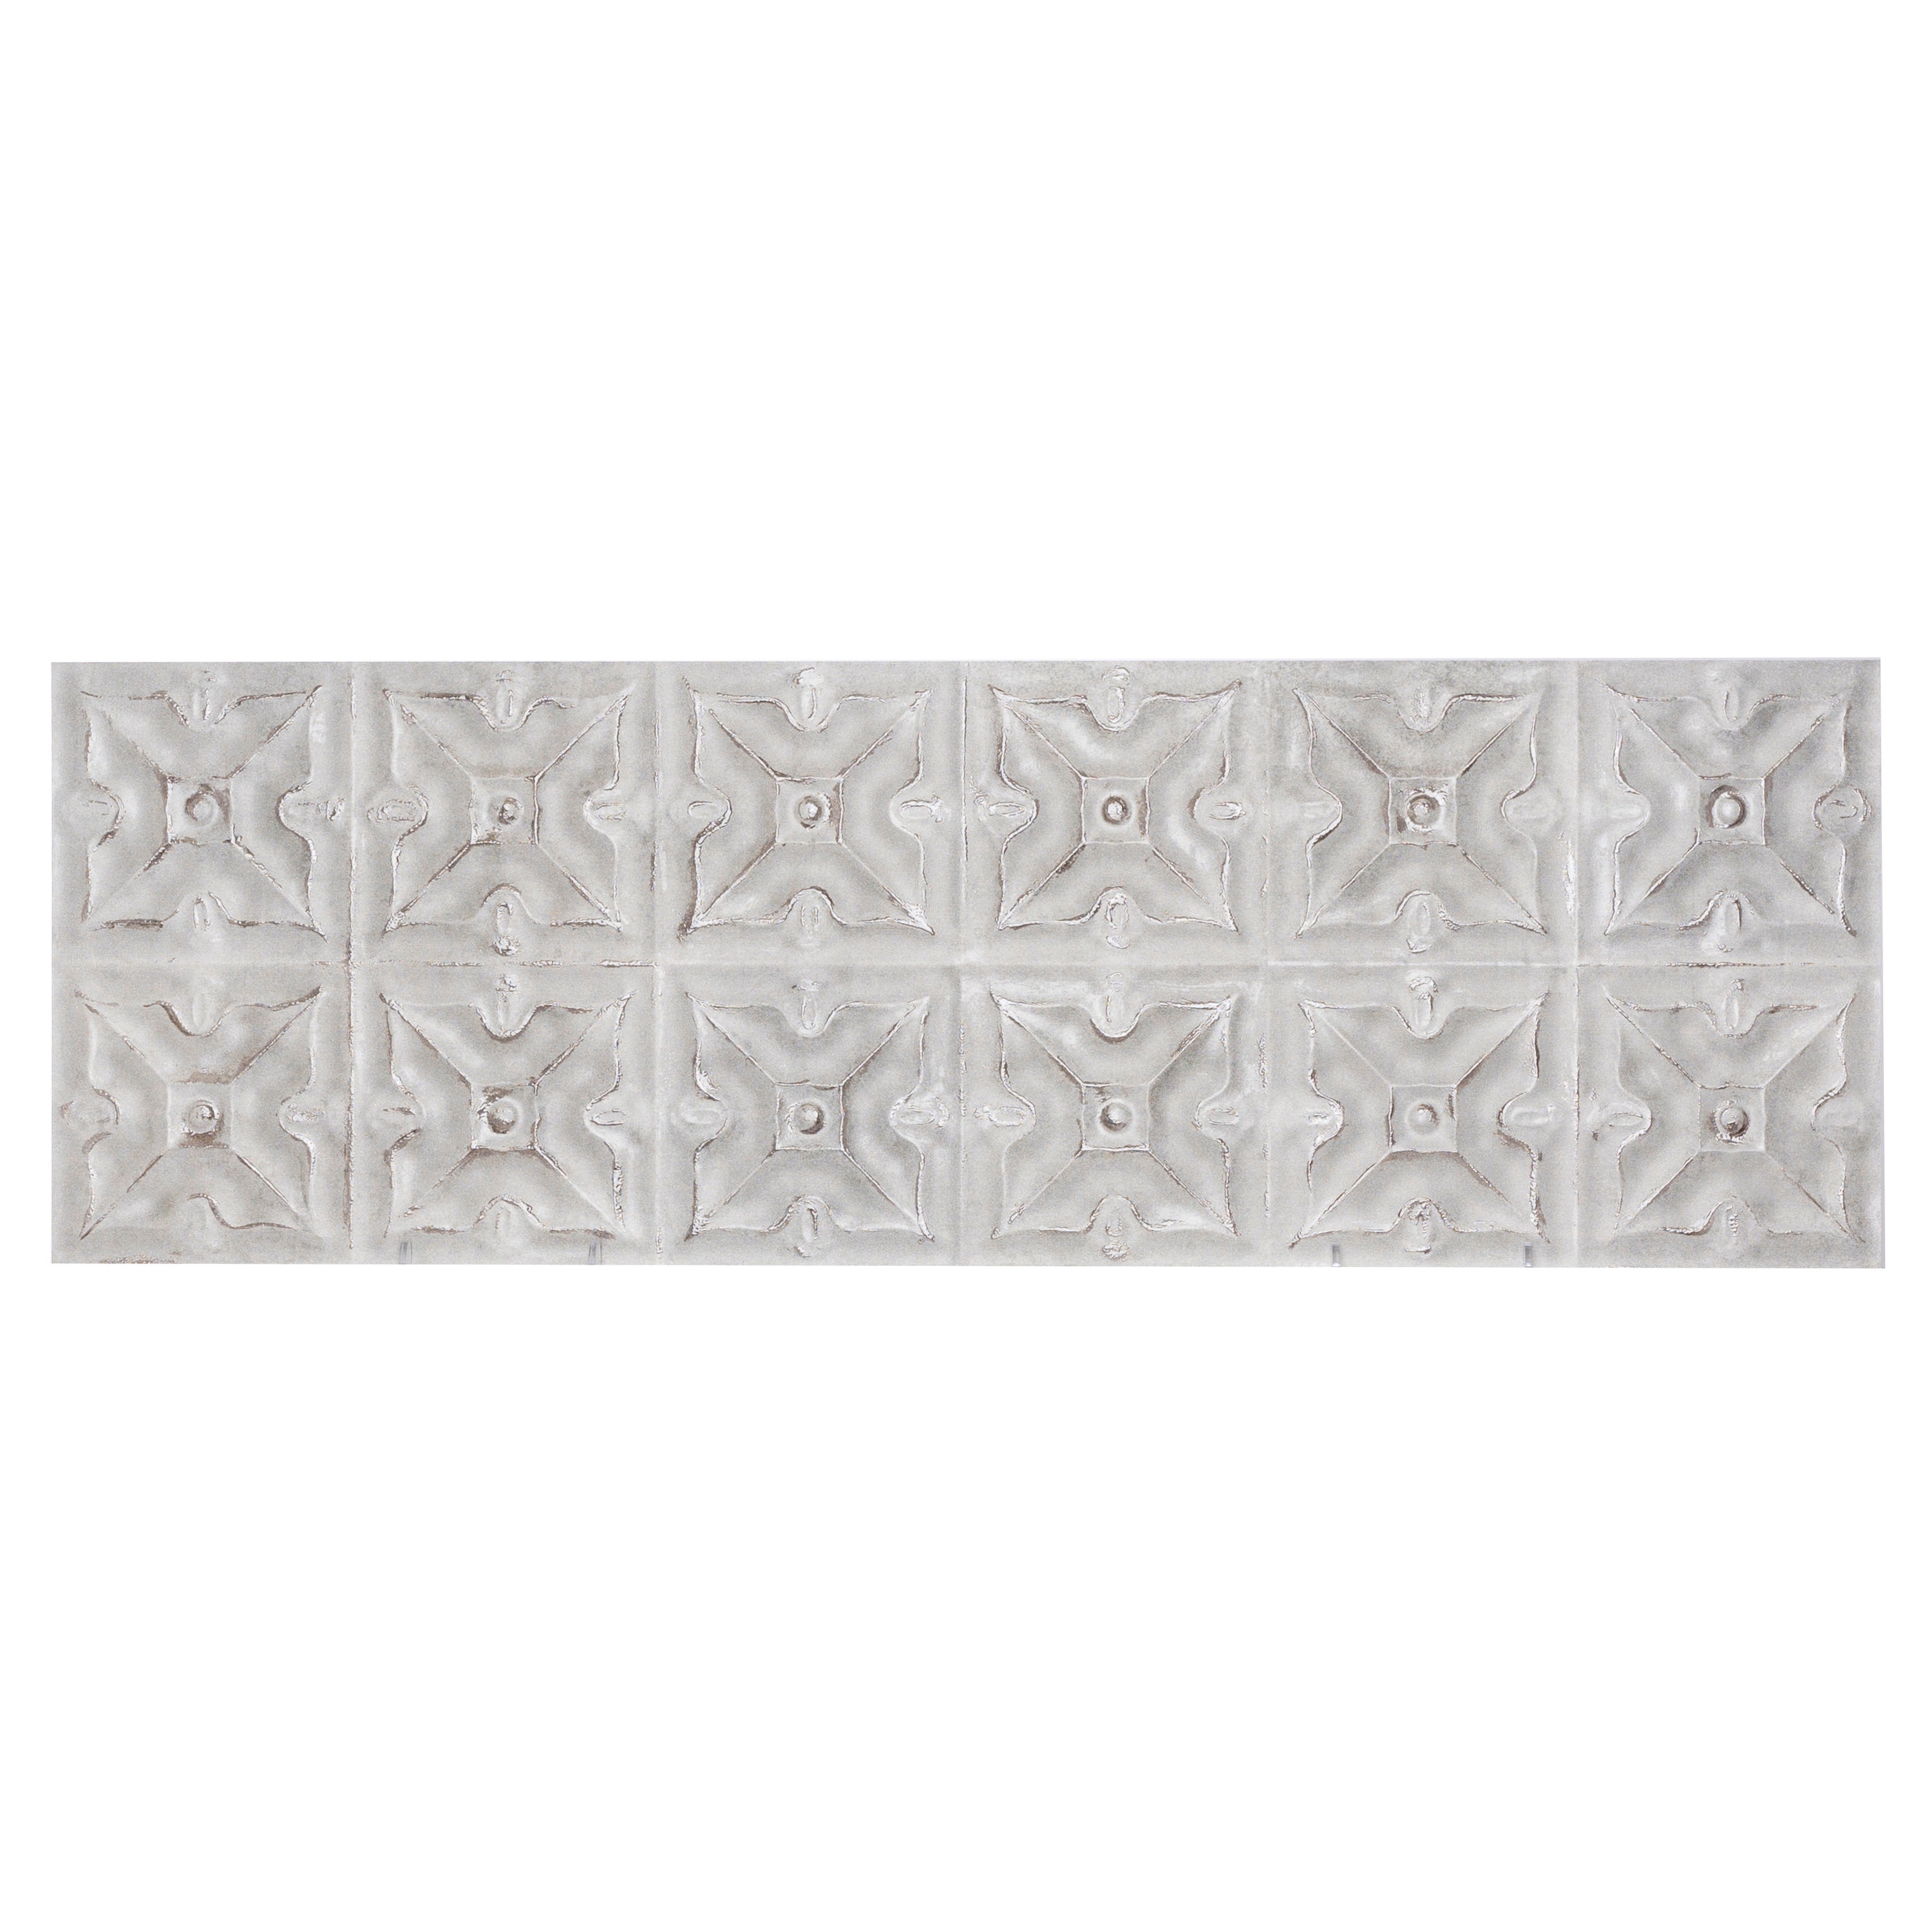 Casa Graphite 12-in x 36-in Matte Ceramic Patterned Wall Tile (2.87-sq. ft/ Piece) | - GBI Tile & Stone Inc. 4143945